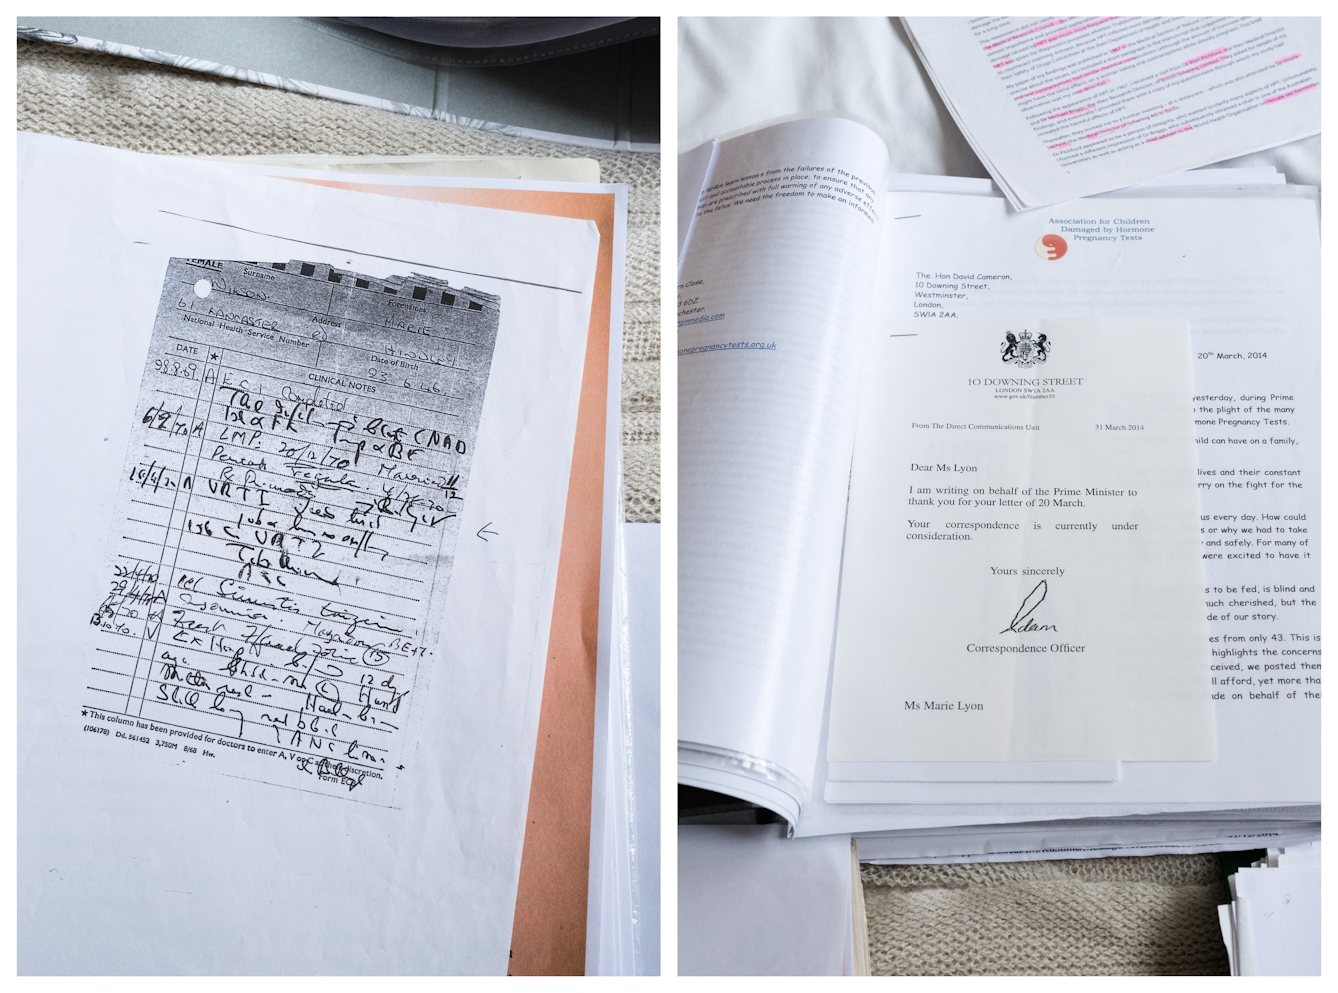 Photographic Diptych of paperwork laid out on a bed spread. The image on the left shows a photocopy of a medical record for Marie, detailing Primodos. The image on the right show a letter Marie received from 10 Downing Street in 2014 replying to her correspondence.